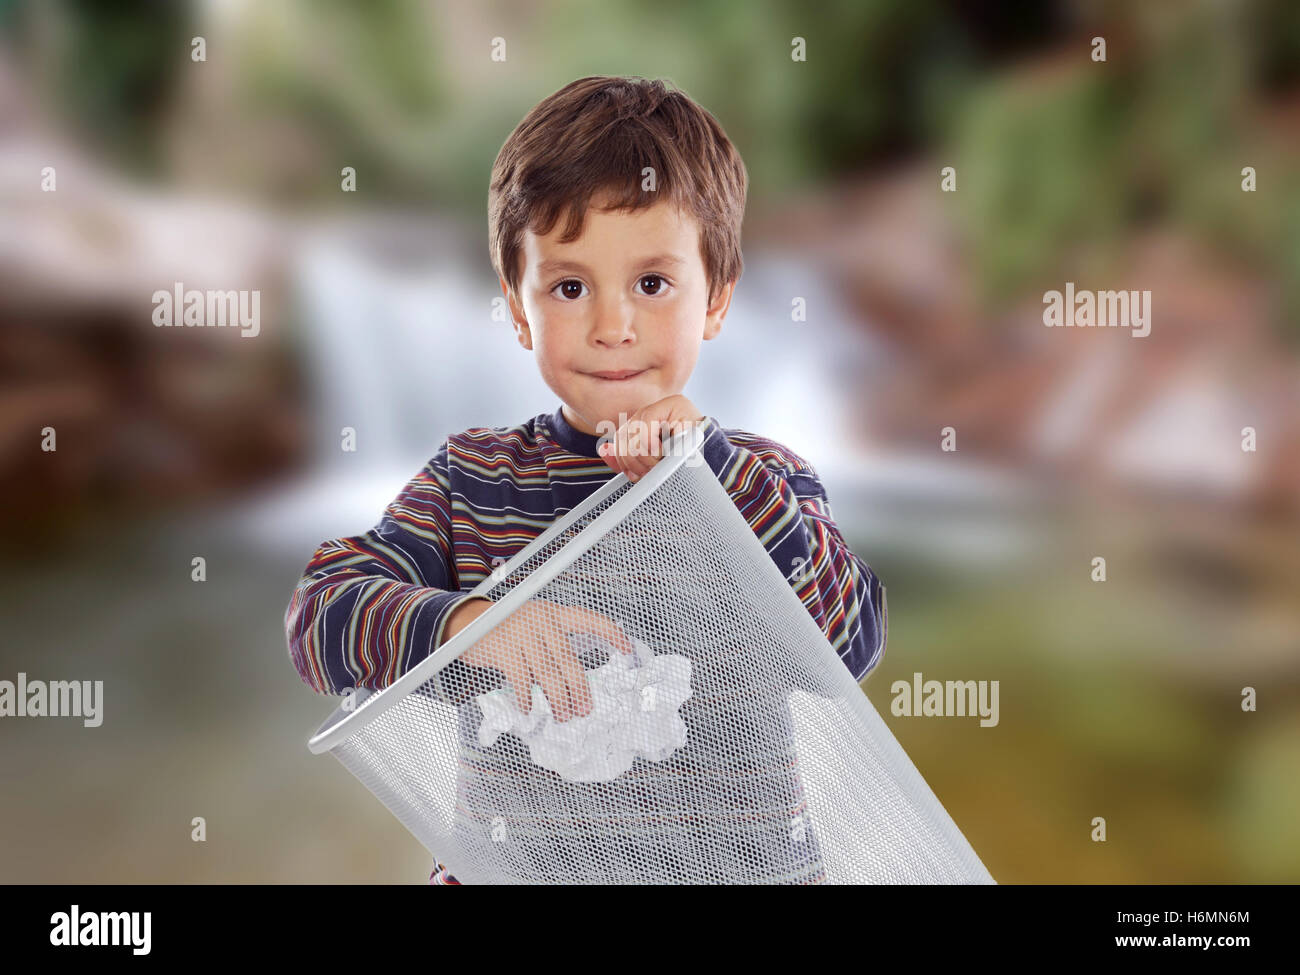 Little kid on the outside throwing a paper in the bin. Stock Photo